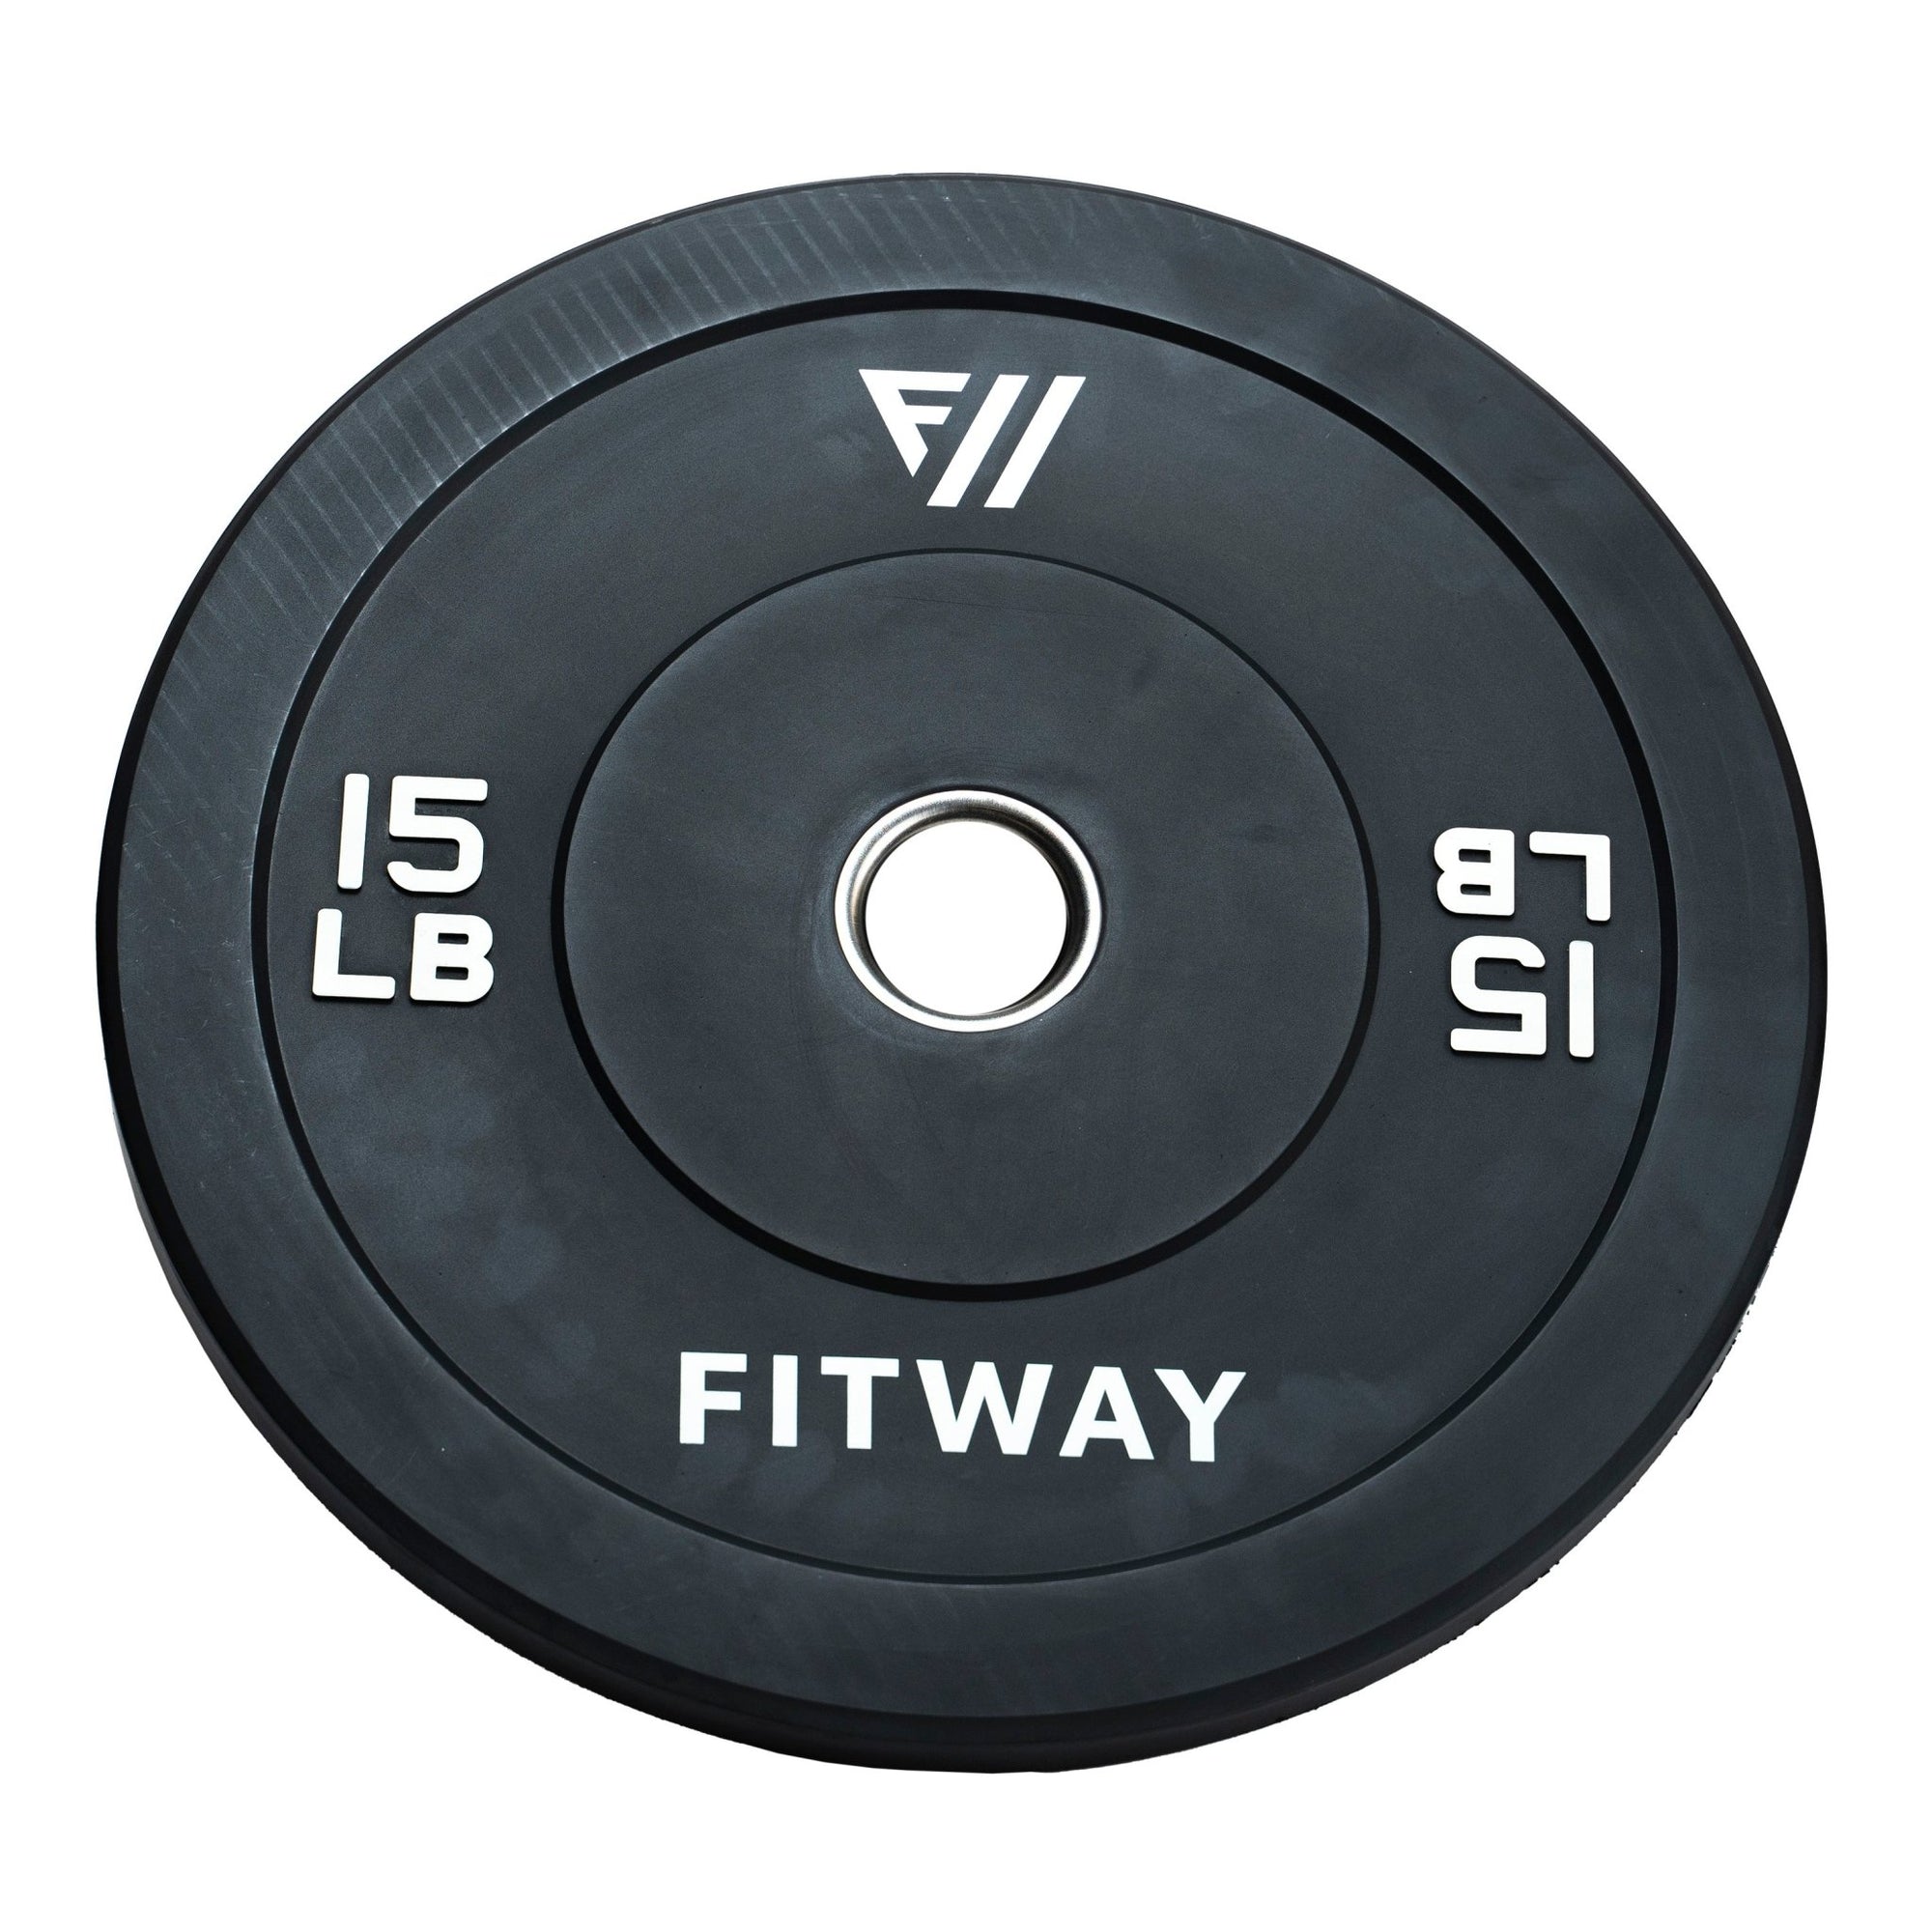 FitWay Equip. 15lb Olympic Rubber Bumper Plate | Fitness Experience